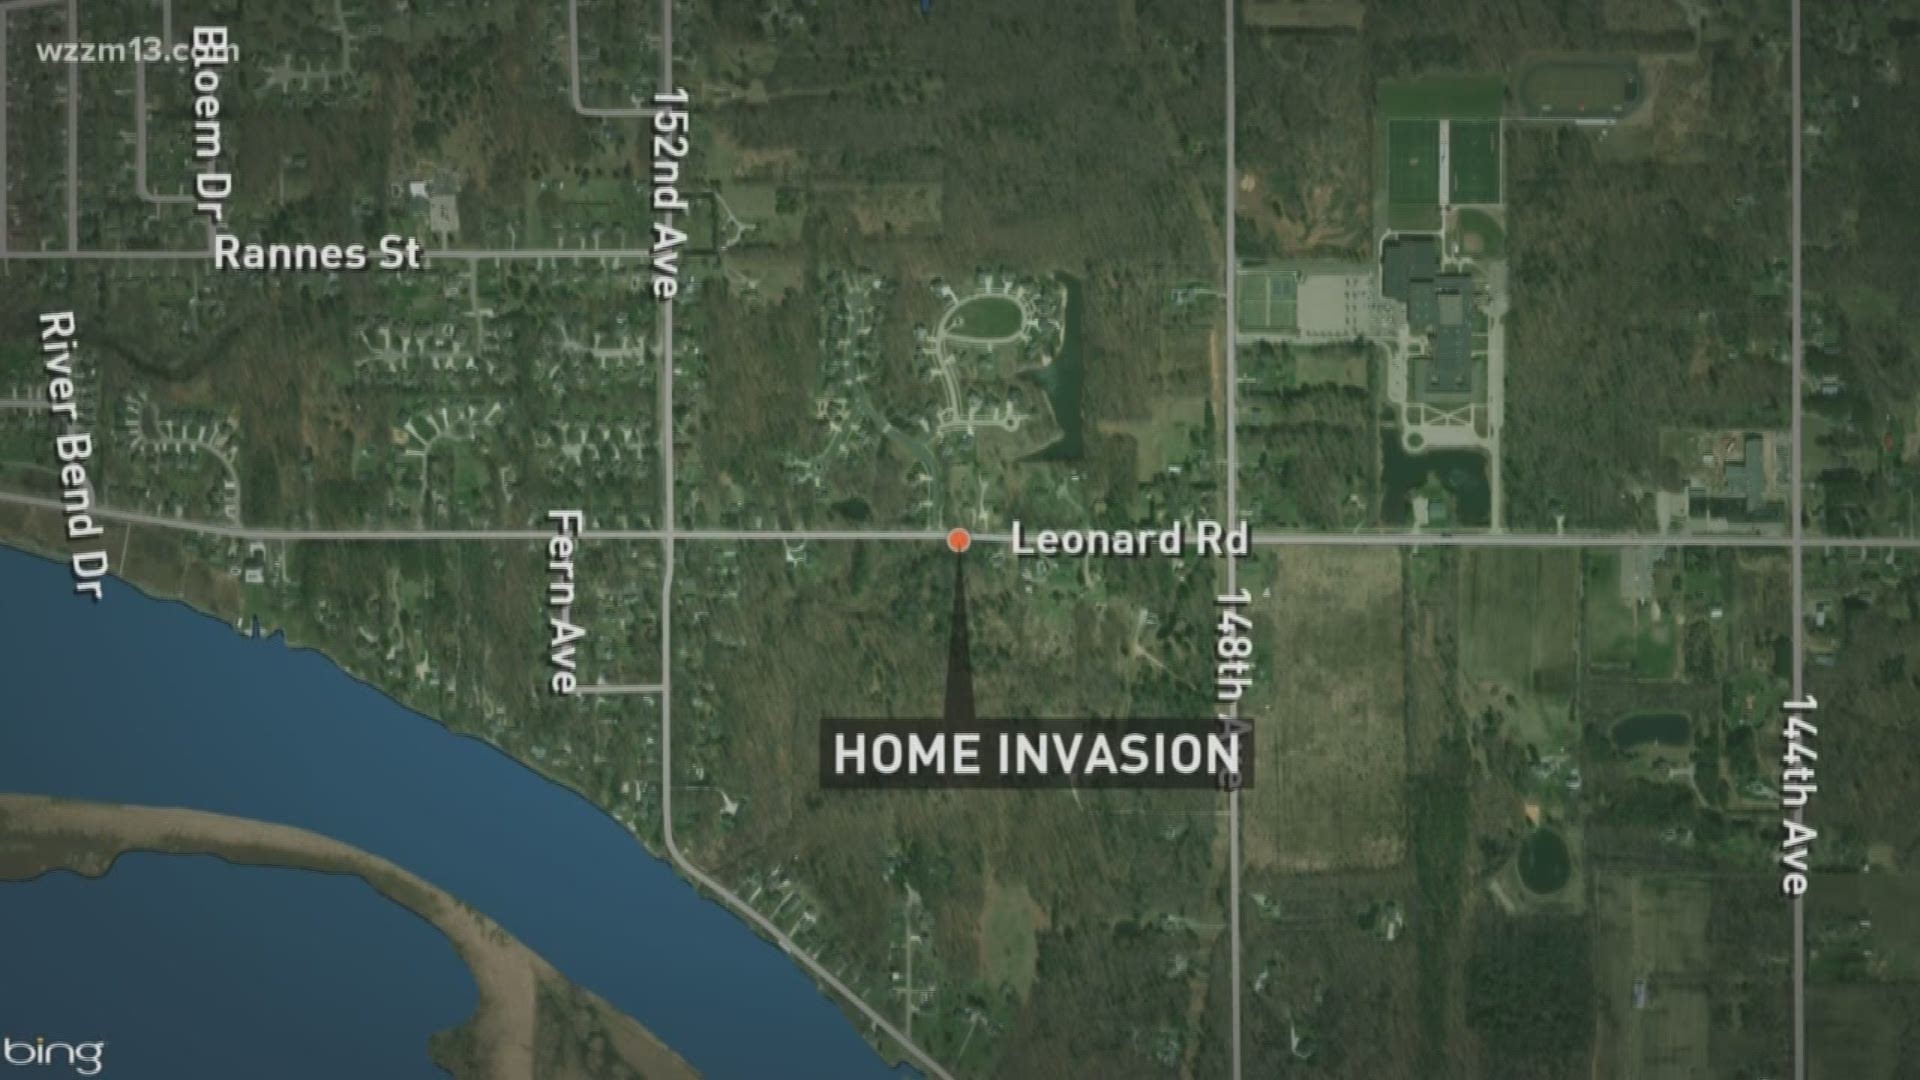 1 person hurt after home invasion in Spring Lake